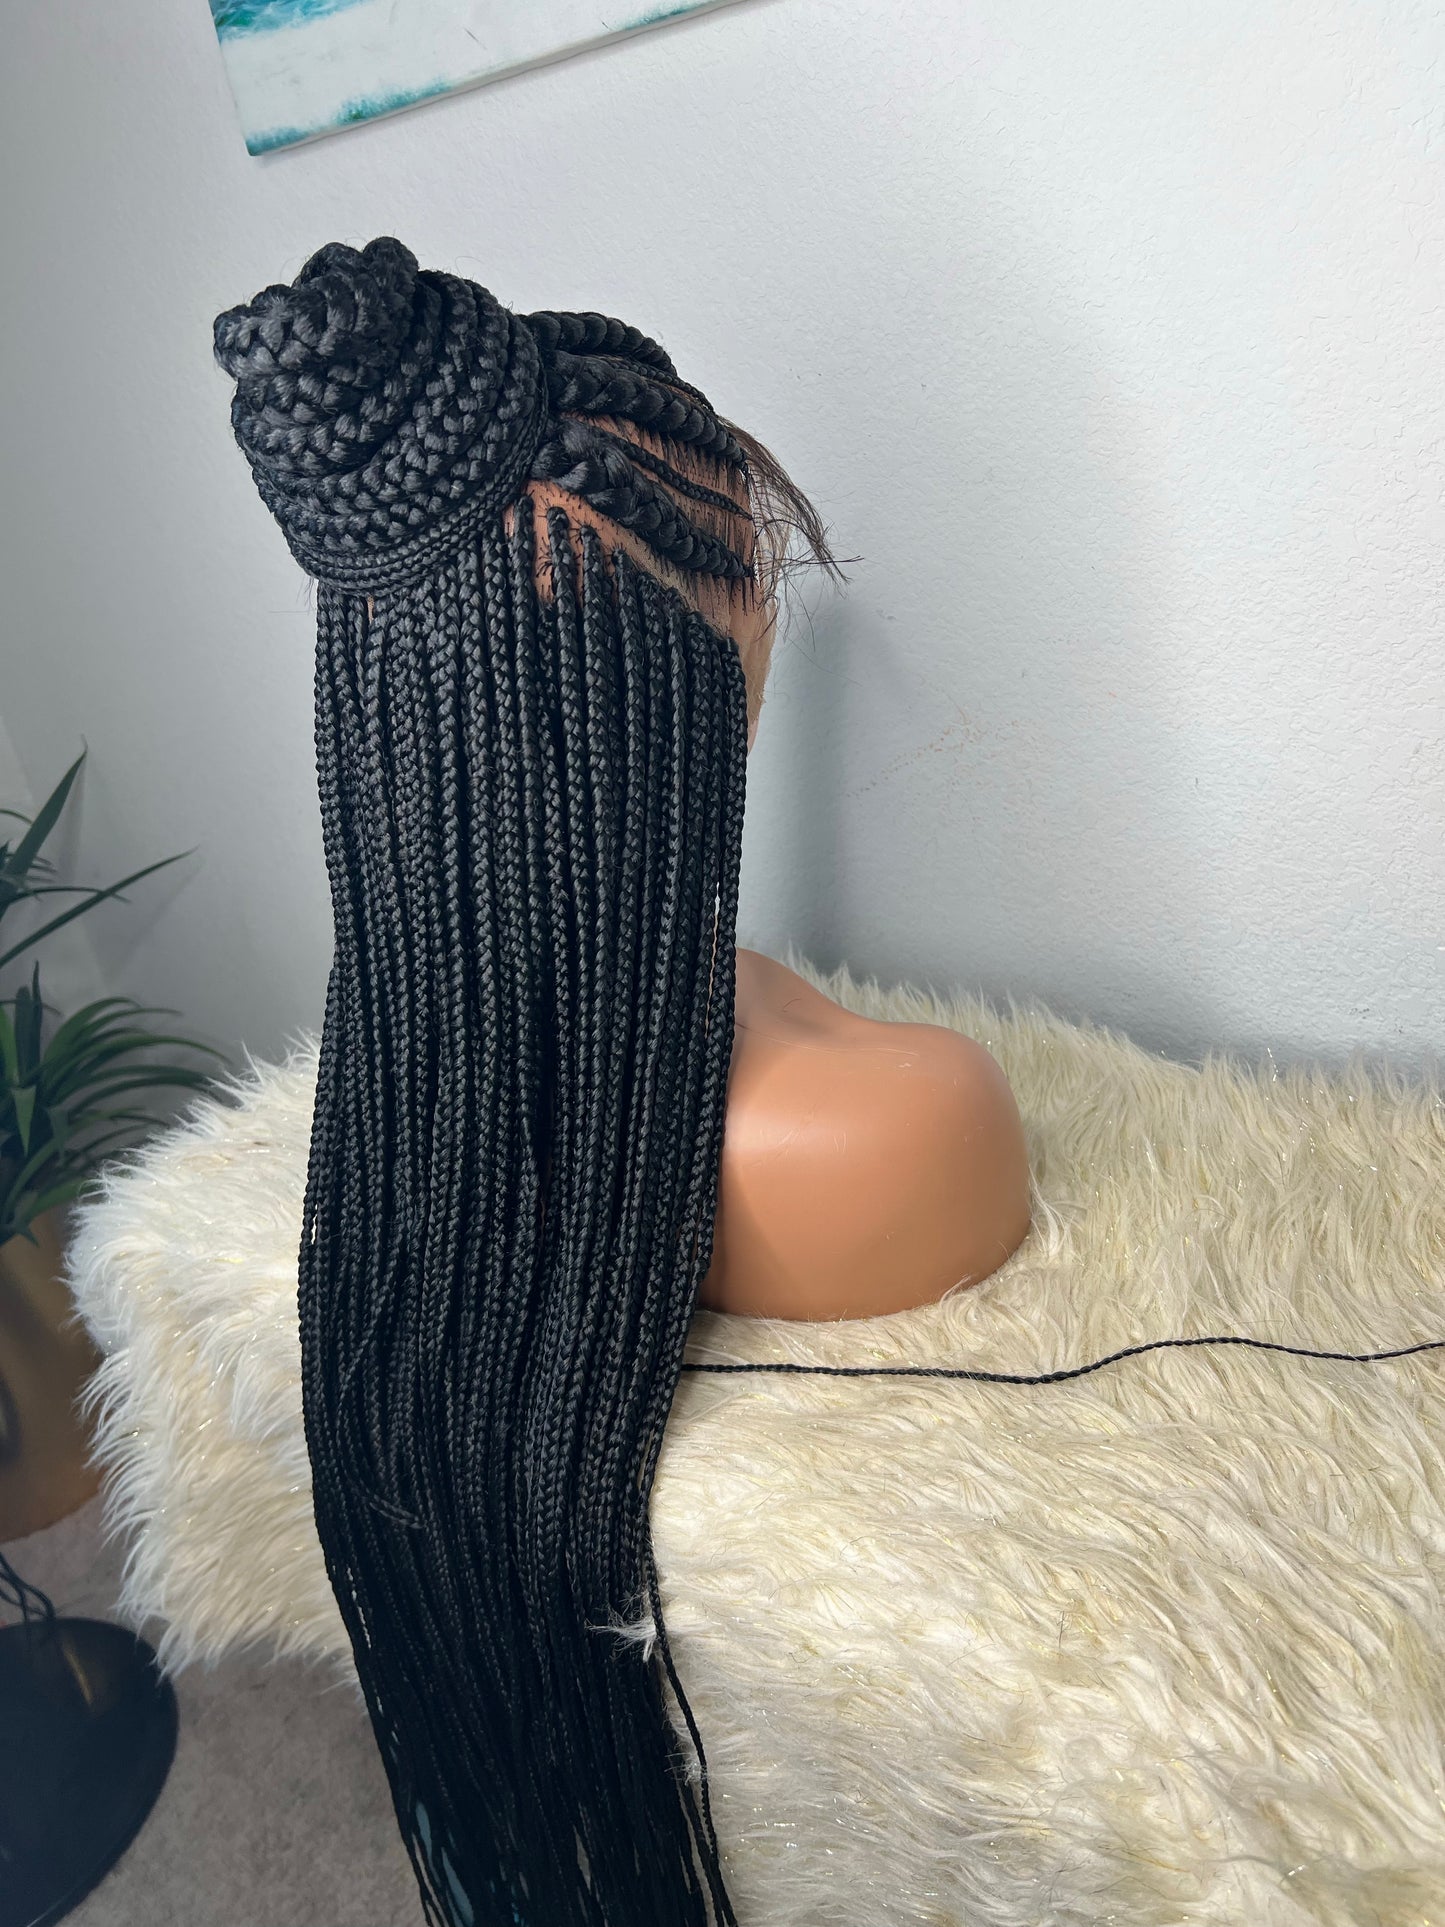 Stitched up down braids full lace